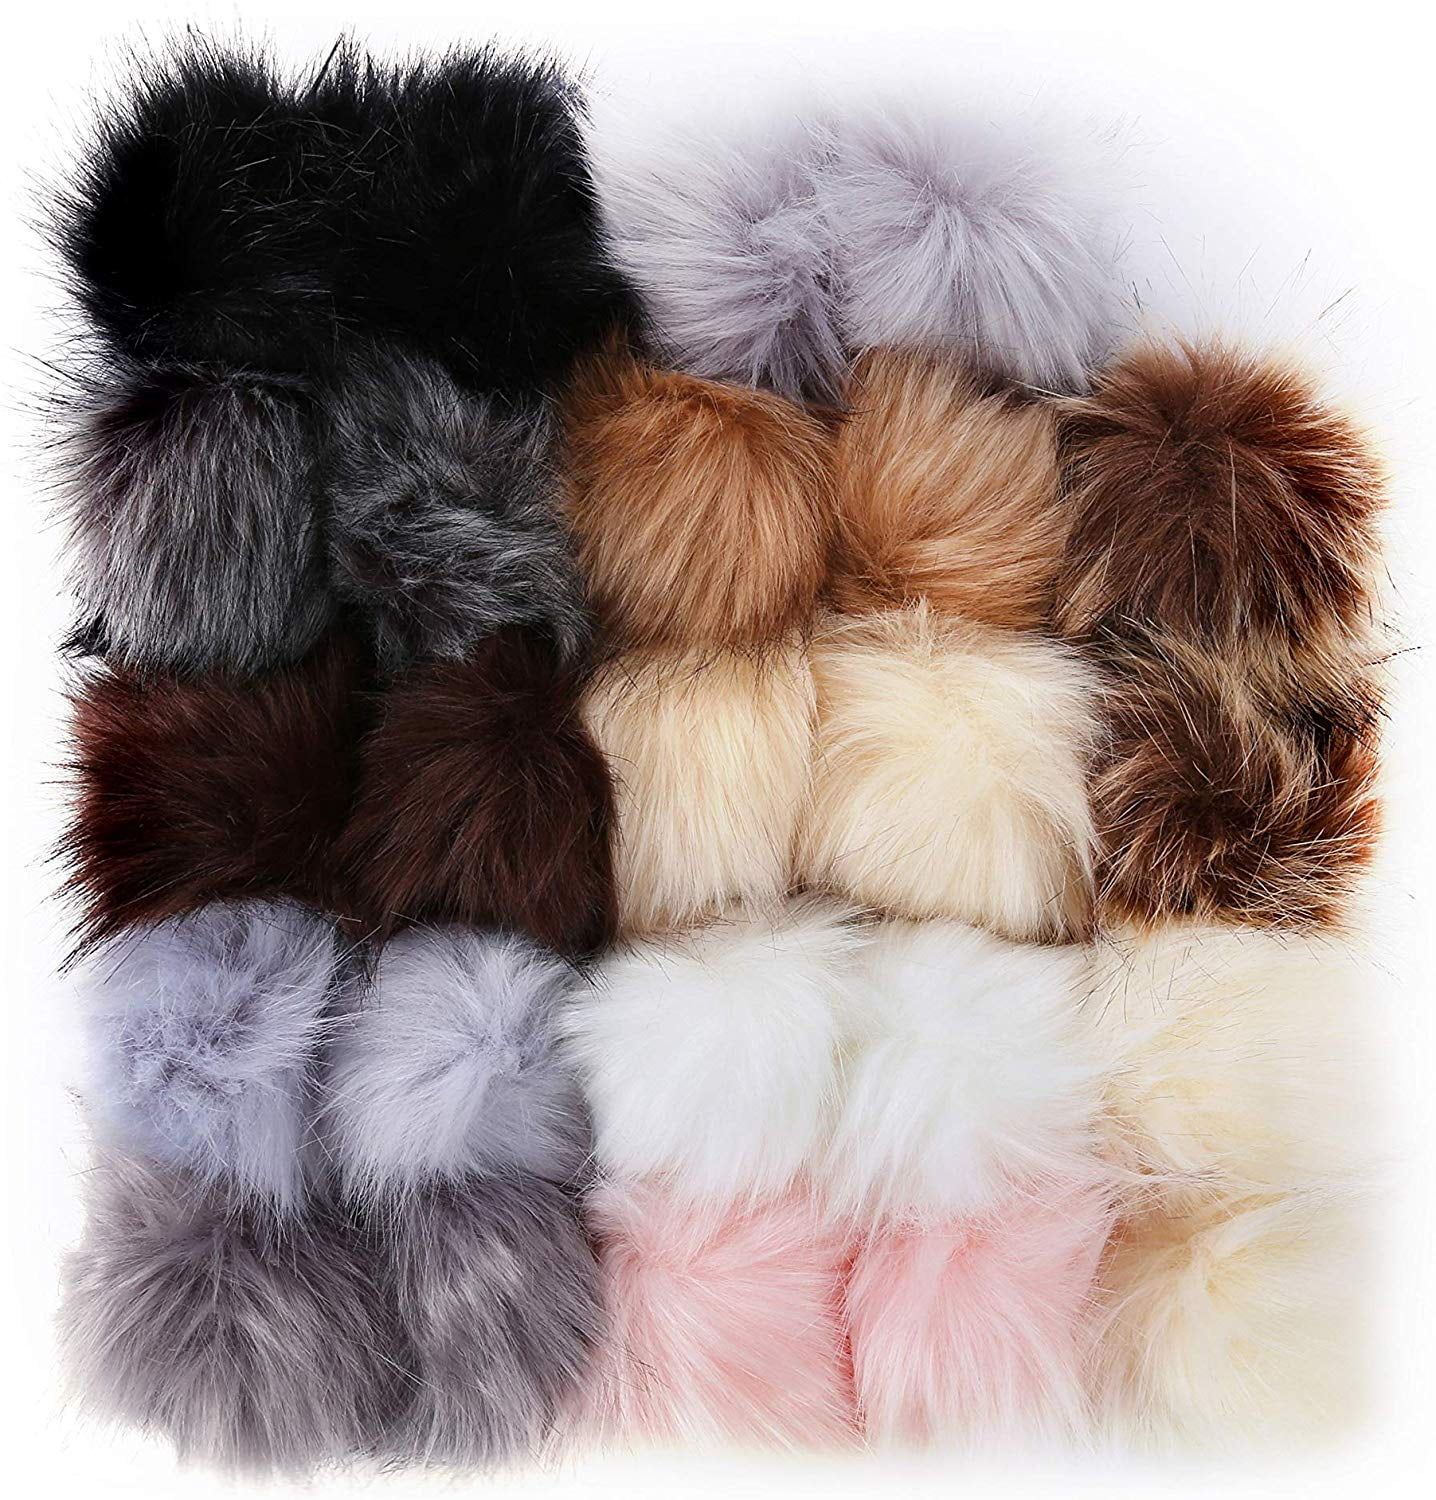 10 Colors Removable Hats Shoes Scarves Bags Keychains Accessories Gift for Women Girls AUHOTA Soft Faux Fur DIY Pompom Ball 10Pcs Faux Fox Fur Fluffy Pom Pom Balls with Elastic Loop